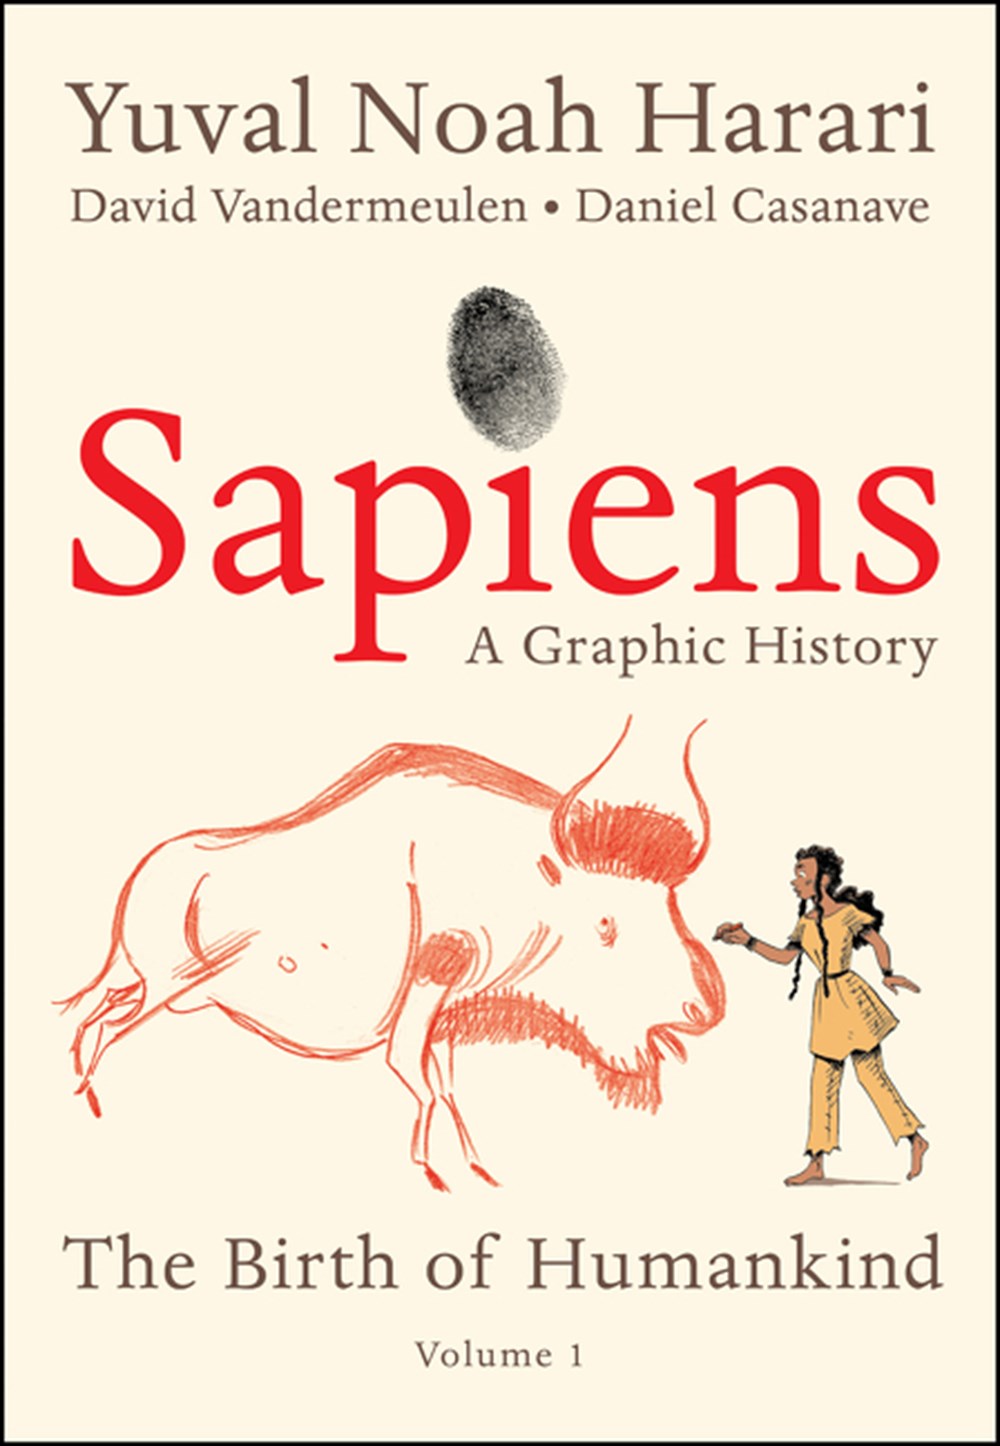 Sapiens A Graphic History: The Birth of Humankind (Vol. 1)